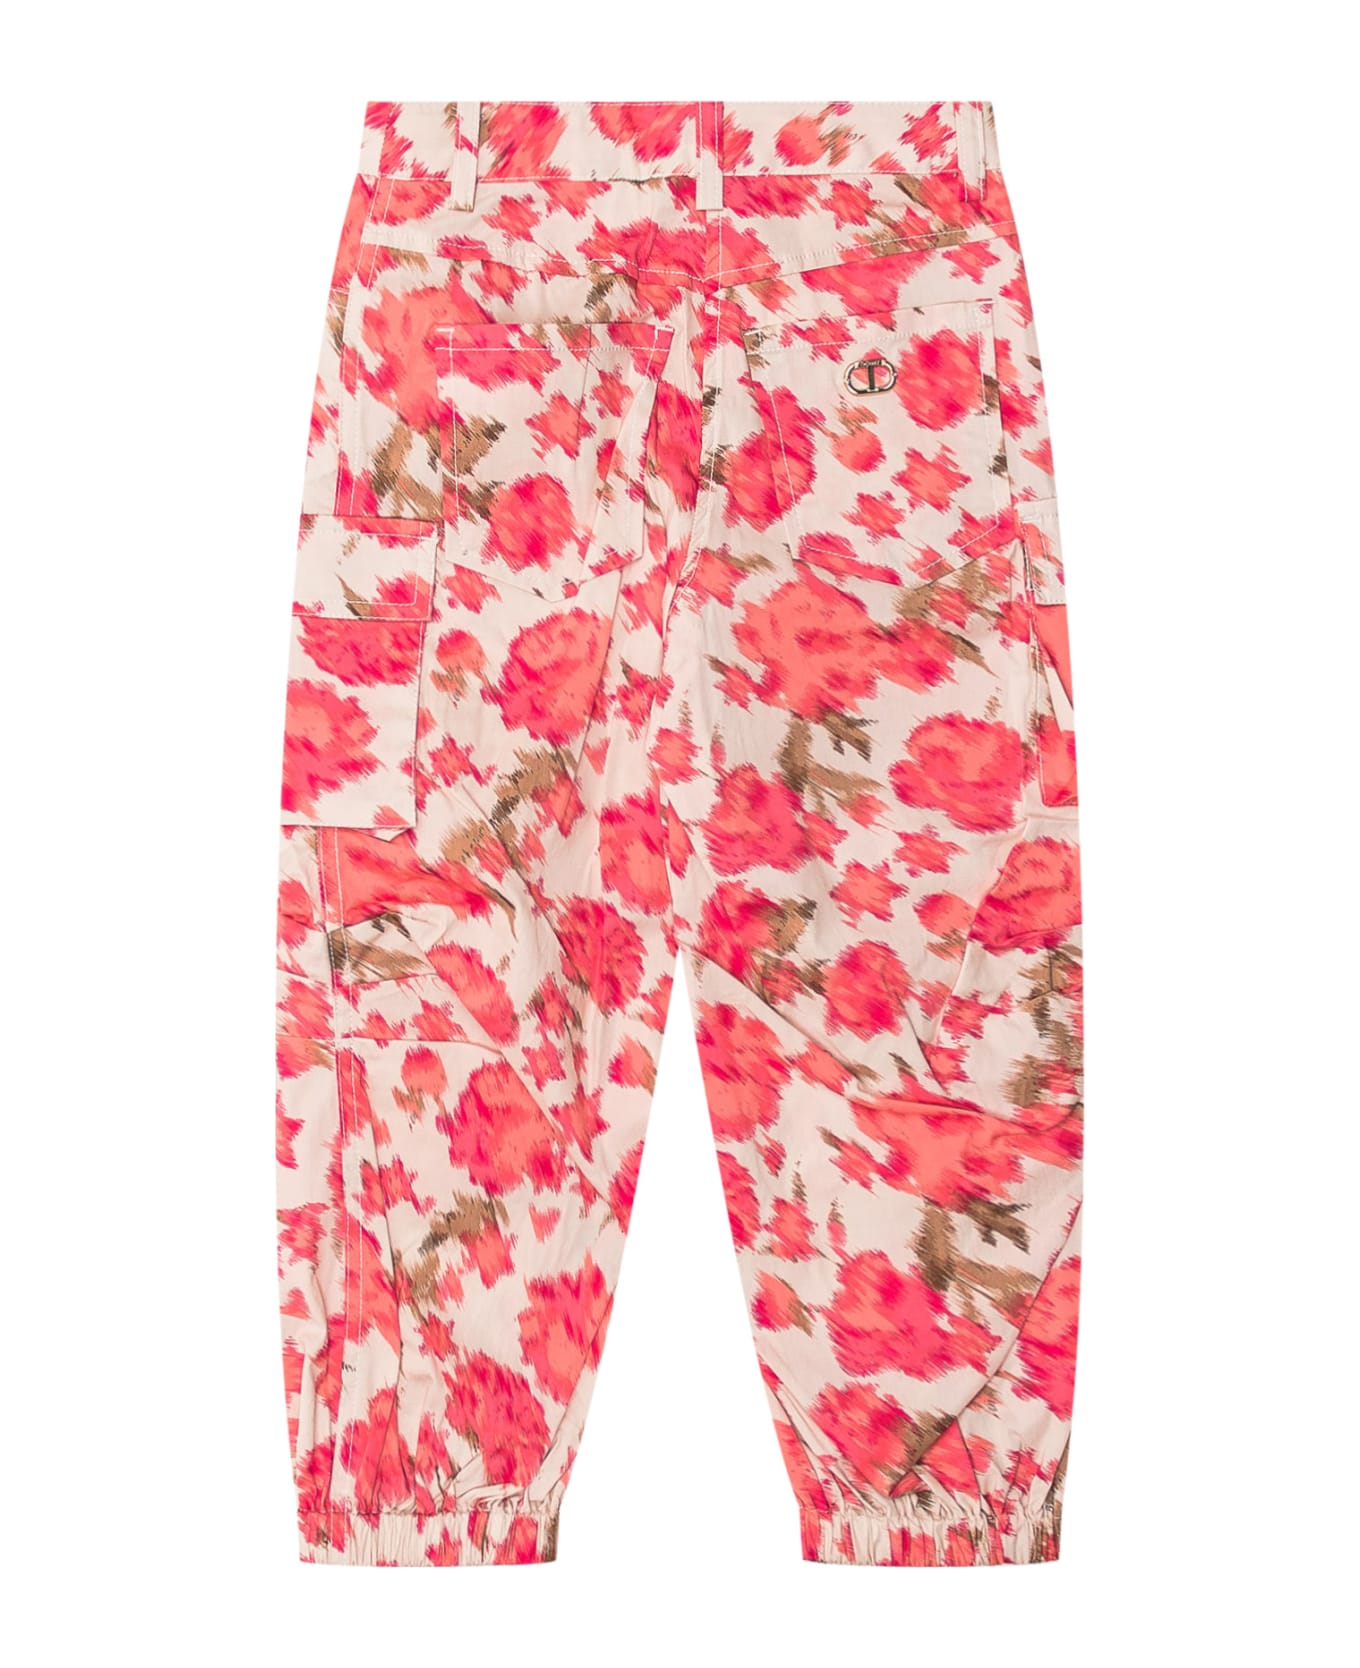 TwinSet Flowers Pants - FIORI CAMELIE ROSE